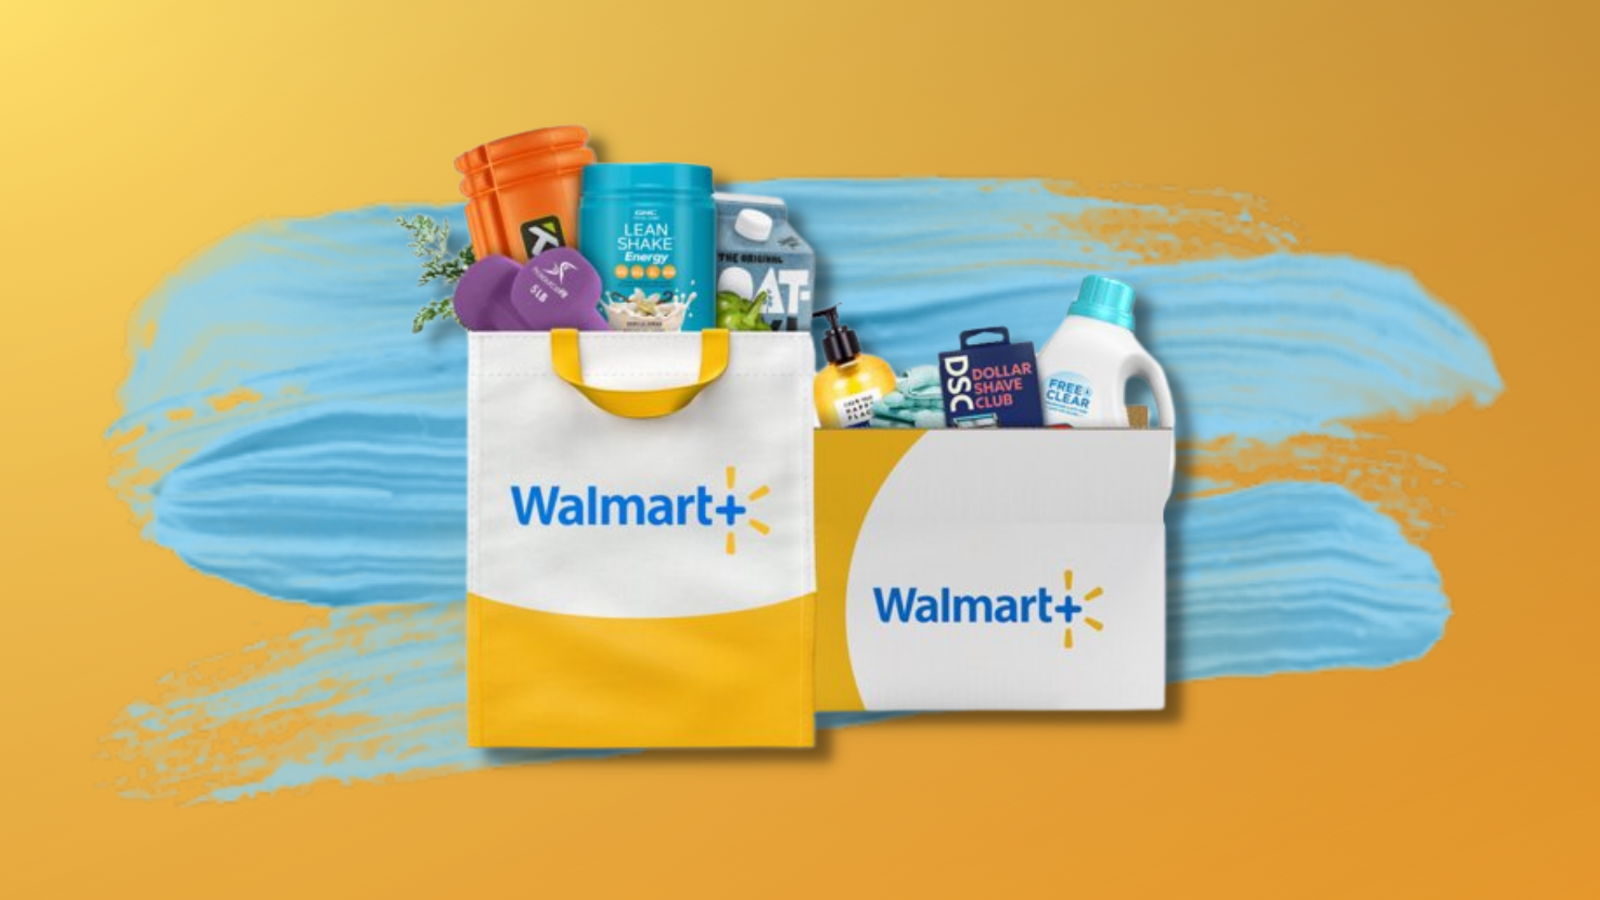 Walmart+ delivery bag and box with groceries and yellow background